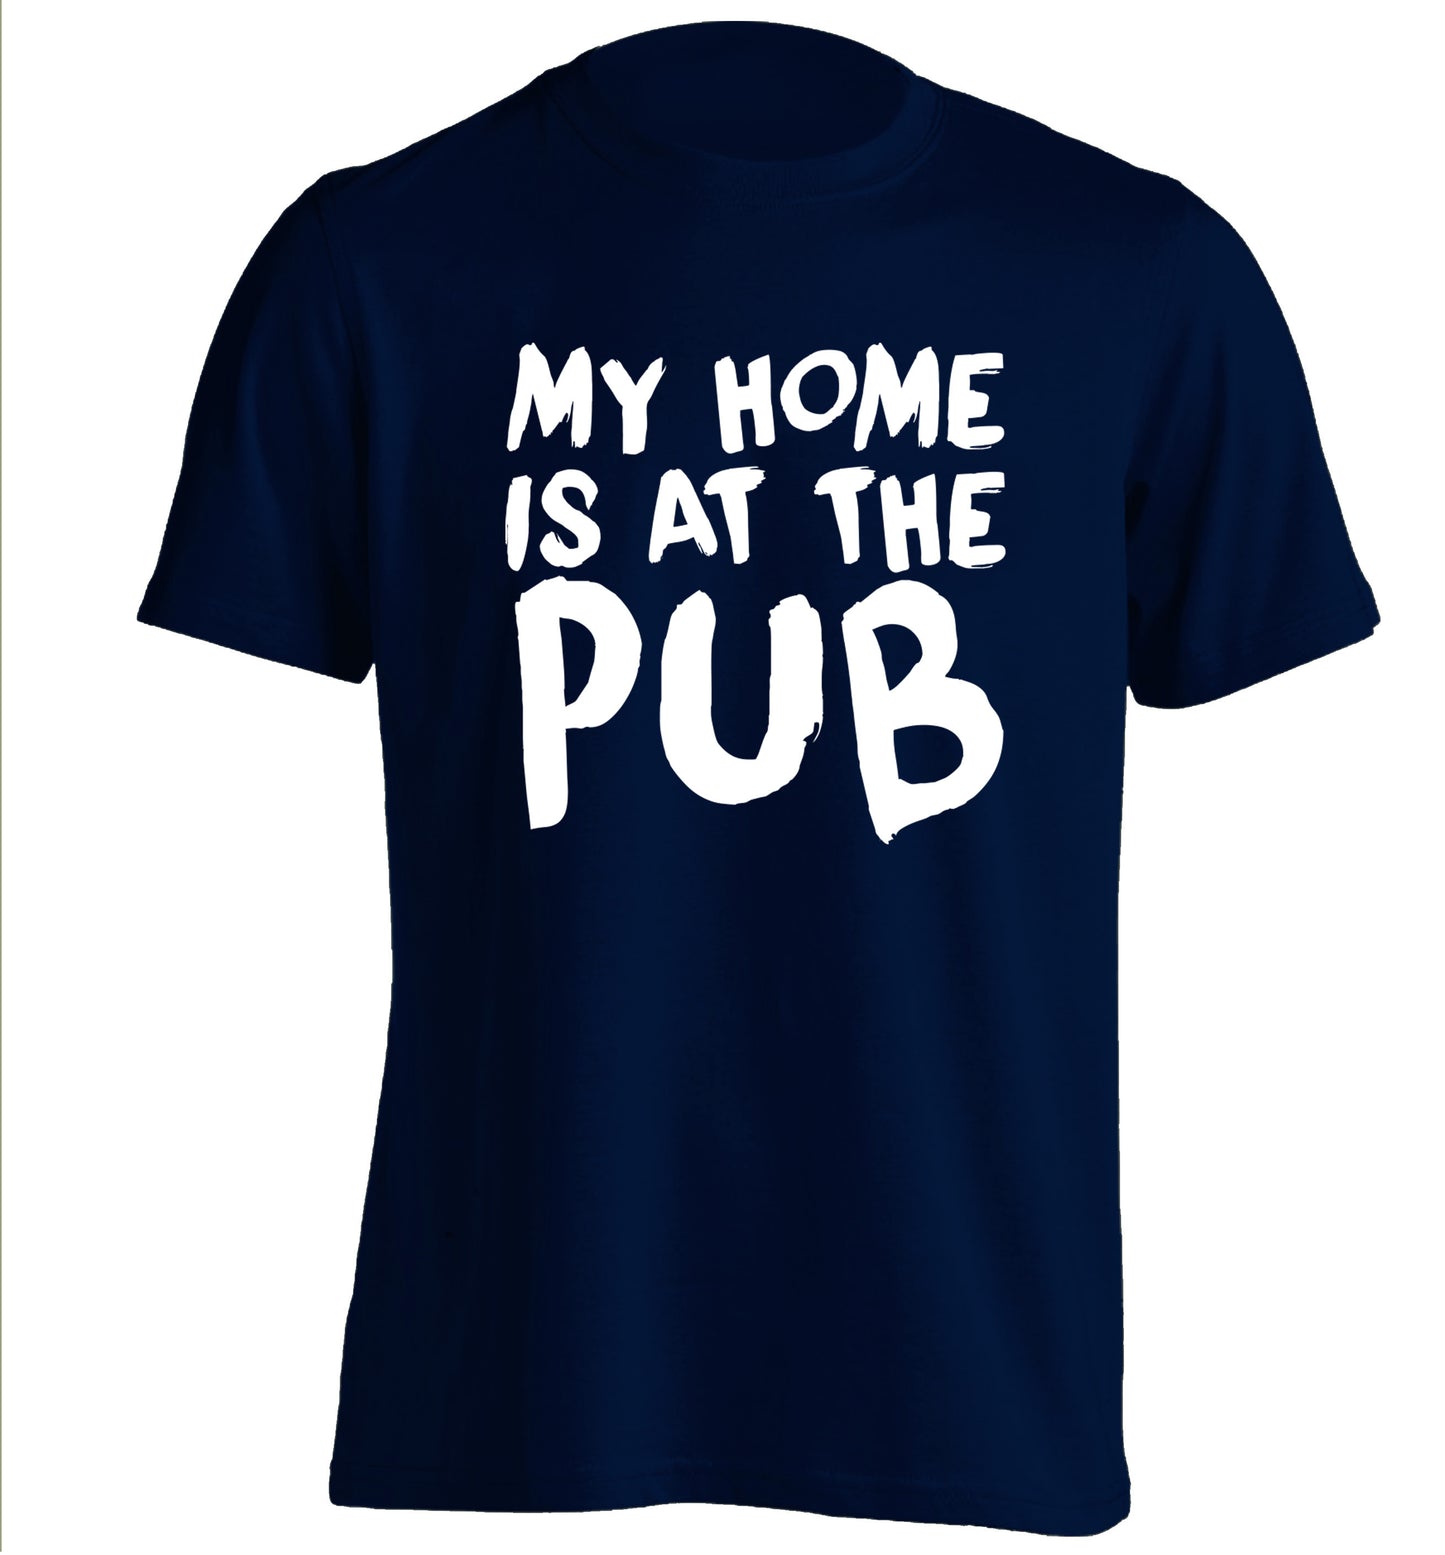 My home is at the pub adults unisex navy Tshirt 2XL